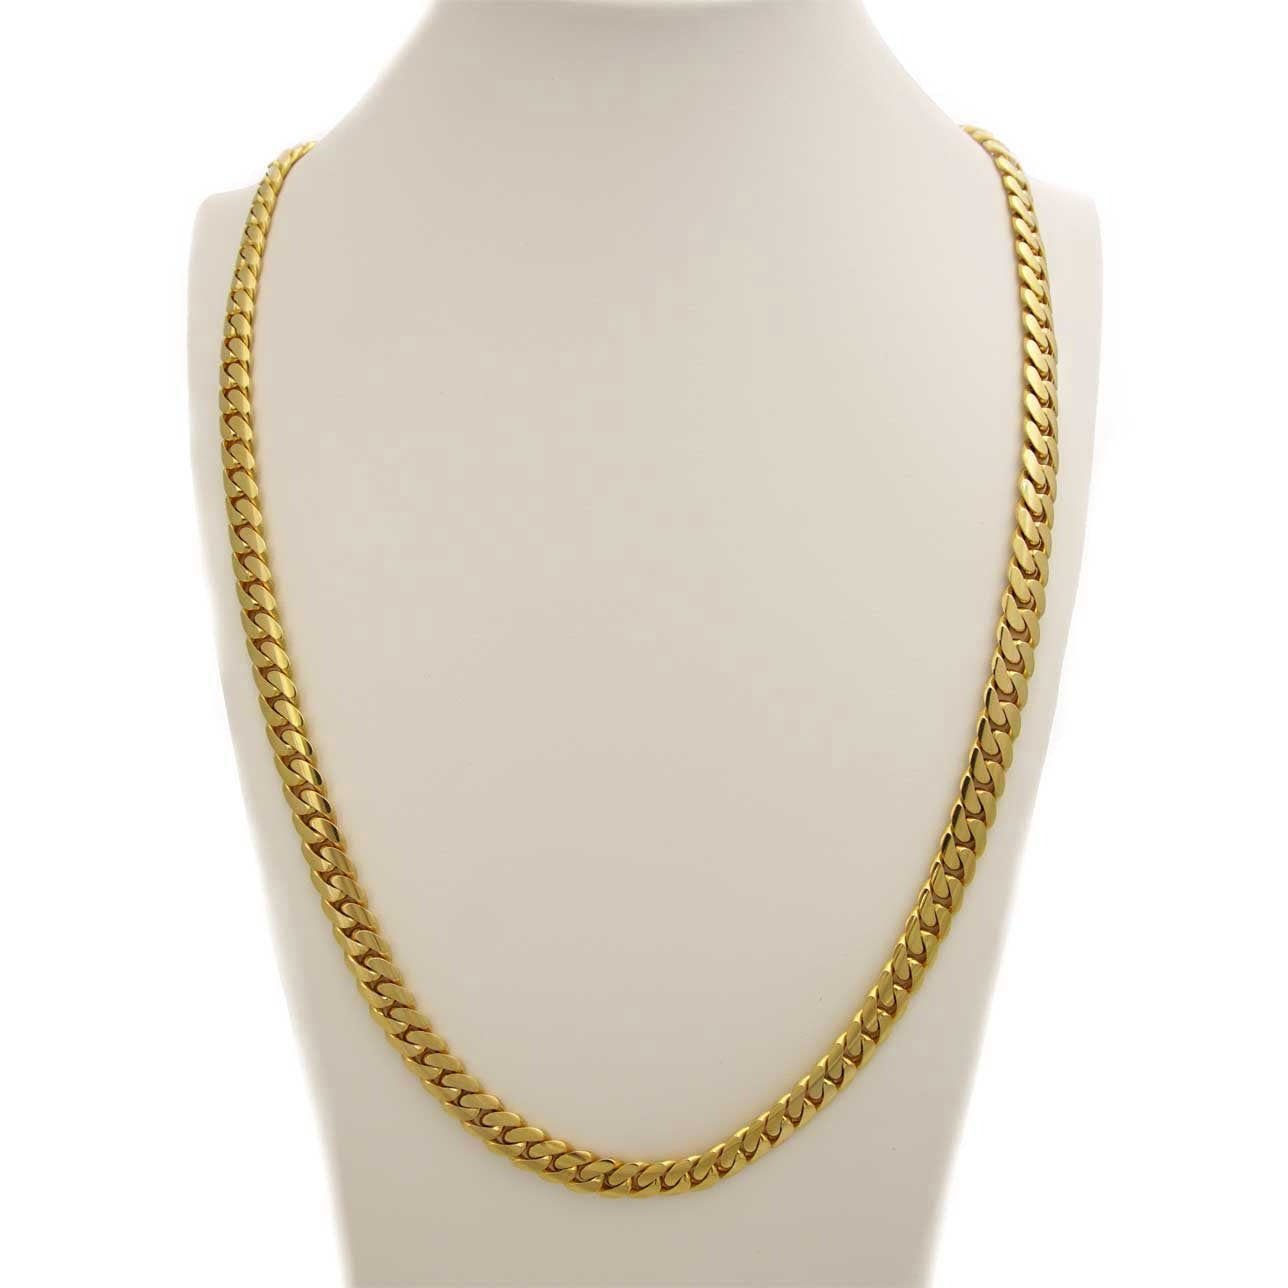 10 MM CUBAN LINK CHAIN (14k Gold over 